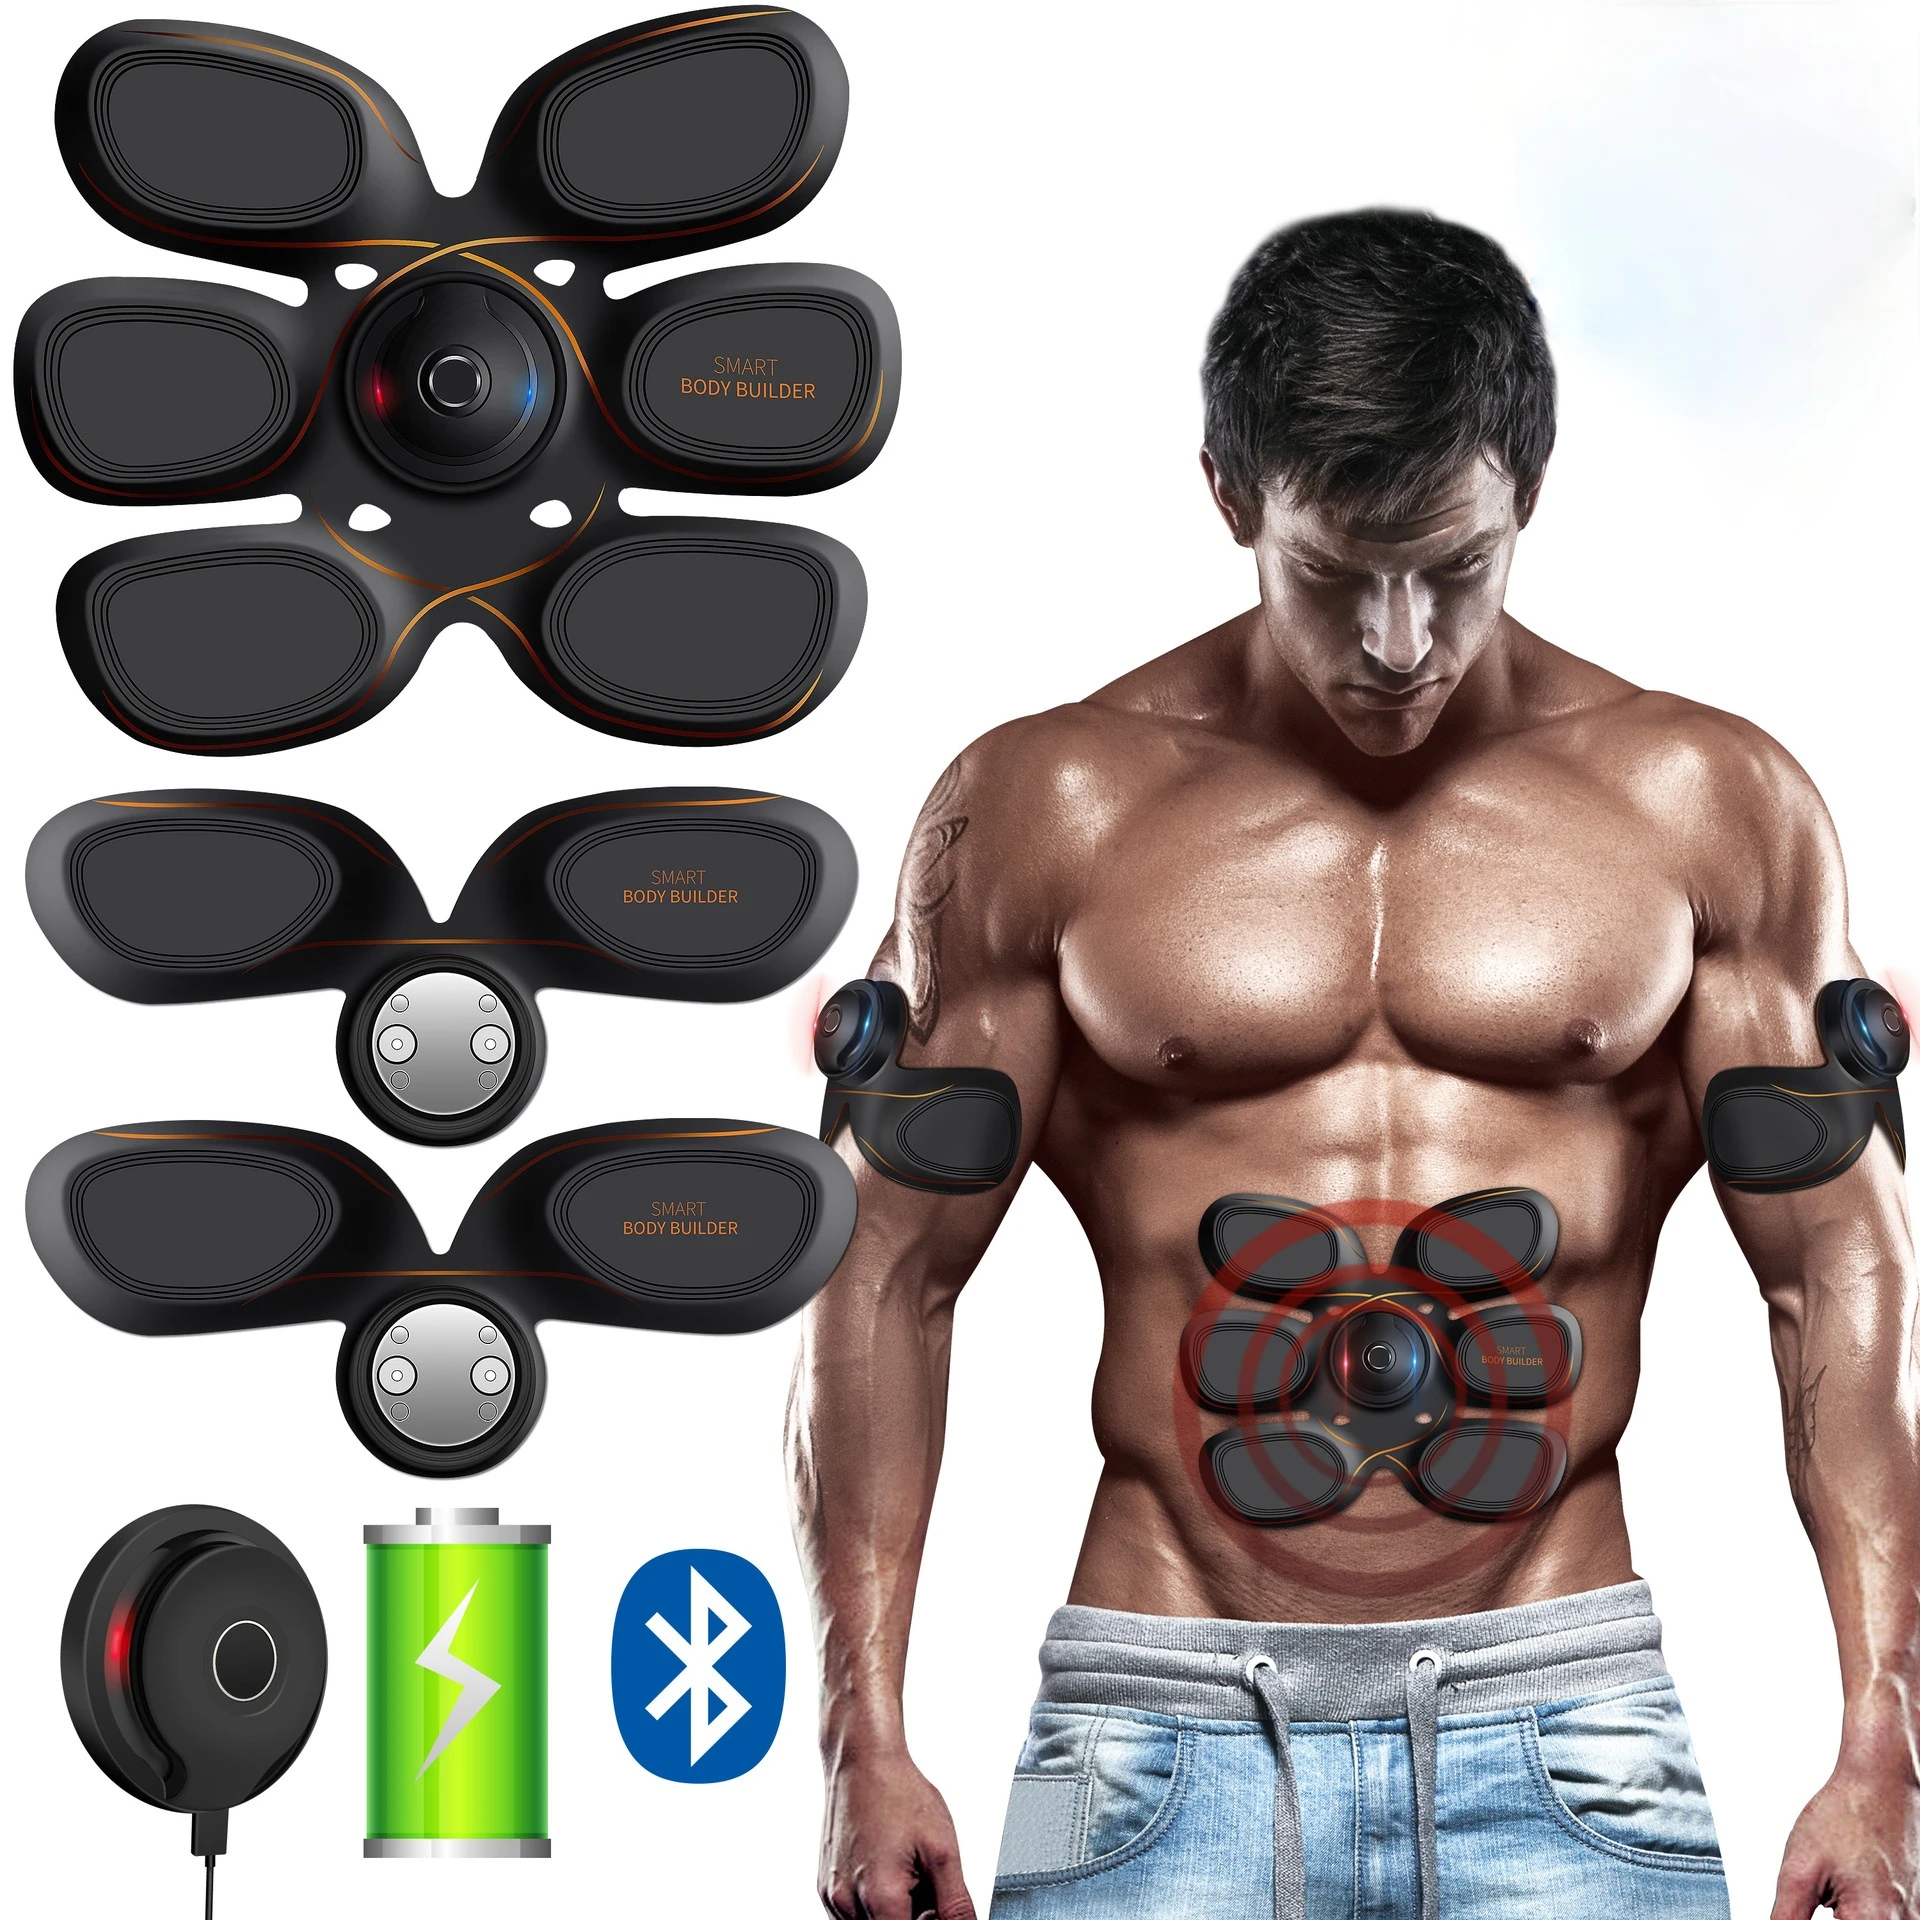 EMS Smart Fitness Abdominal Muscle Stimulator Newest Mobile Phone Application Control Home Gym Office Fitness Equipment